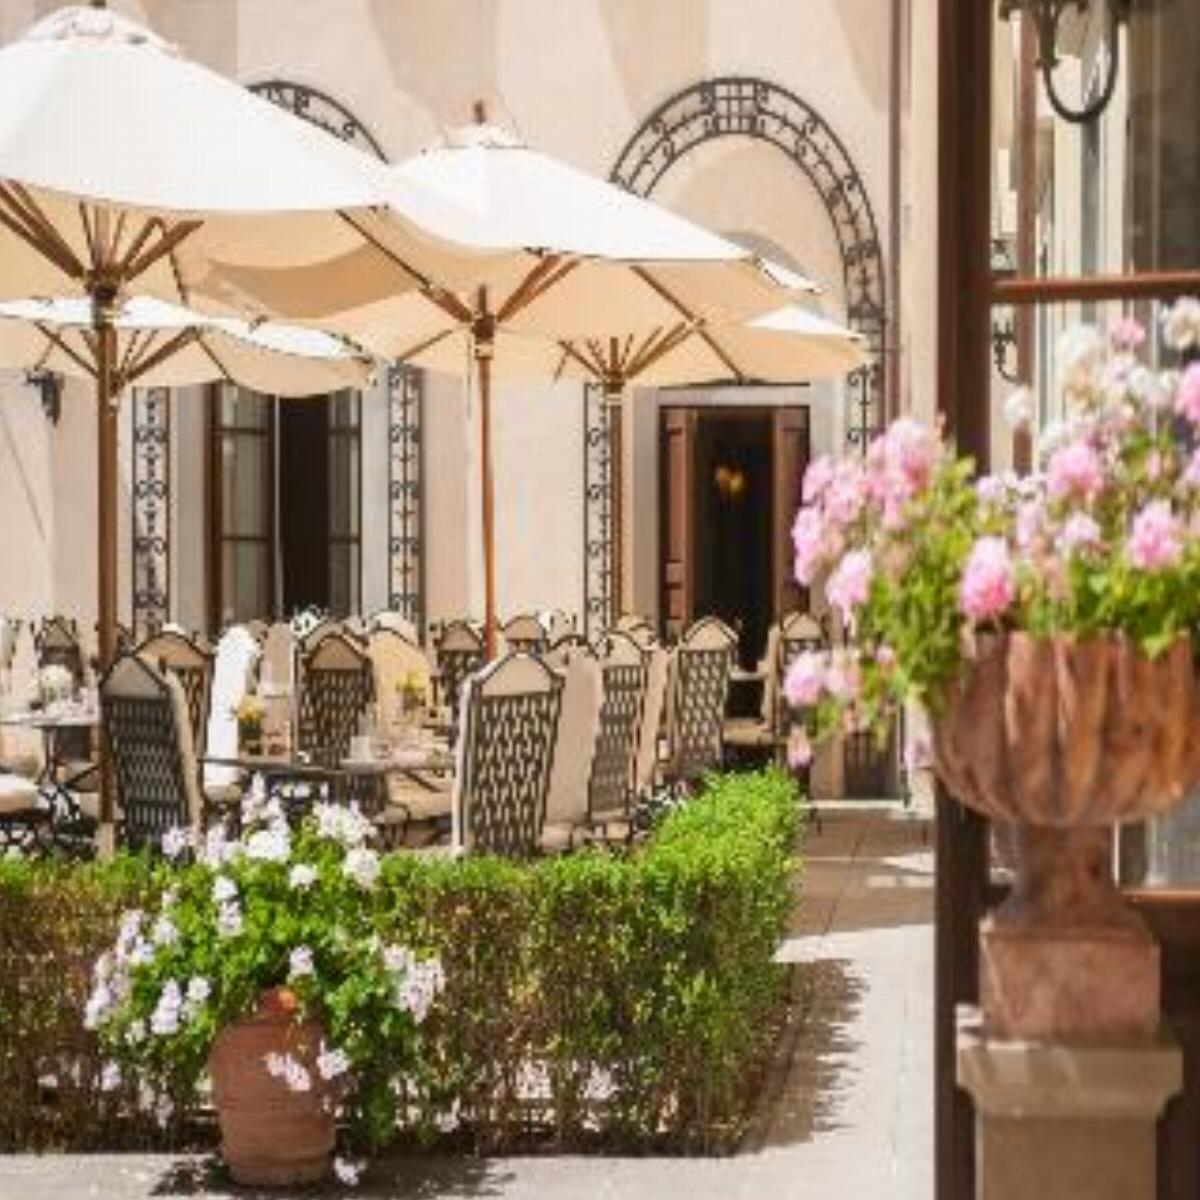 Four Seasons Hotel Florence Italy